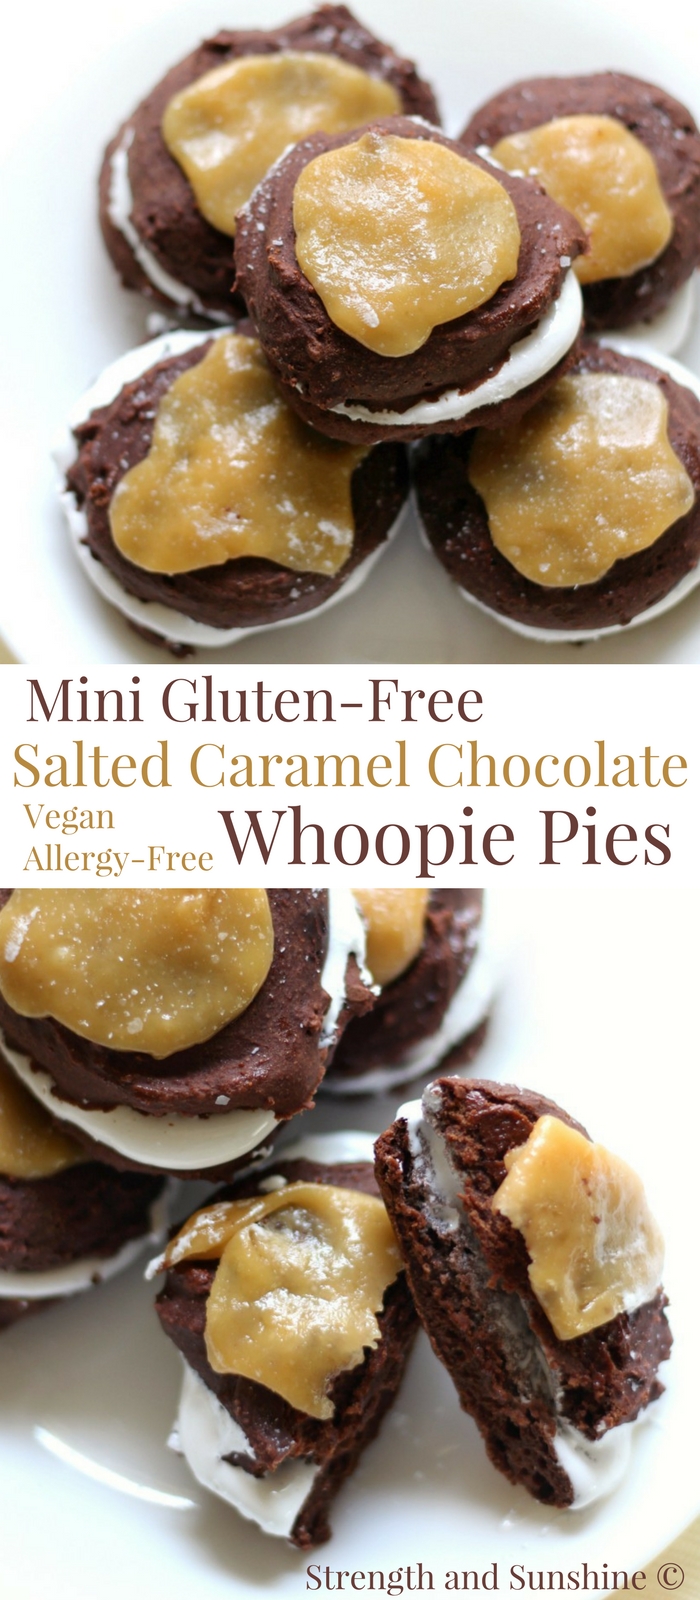 Mini Gluten-Free Salted Caramel Chocolate Whoopie Pies (Vegan, Allergy-Free) | Strength and Sunshine @RebeccaGF666 A fun flavor combo for your favorite American cream-filled "cookie-pie-cake"! These Mini Gluten-Free Salted Caramel Chocolate Whoopie Pies are vegan, top-8 allergy-free, and a perfect adult & kid-friendly dessert recipe! #whoopiepies #glutenfree #vegan #dessert #saltedcaramel